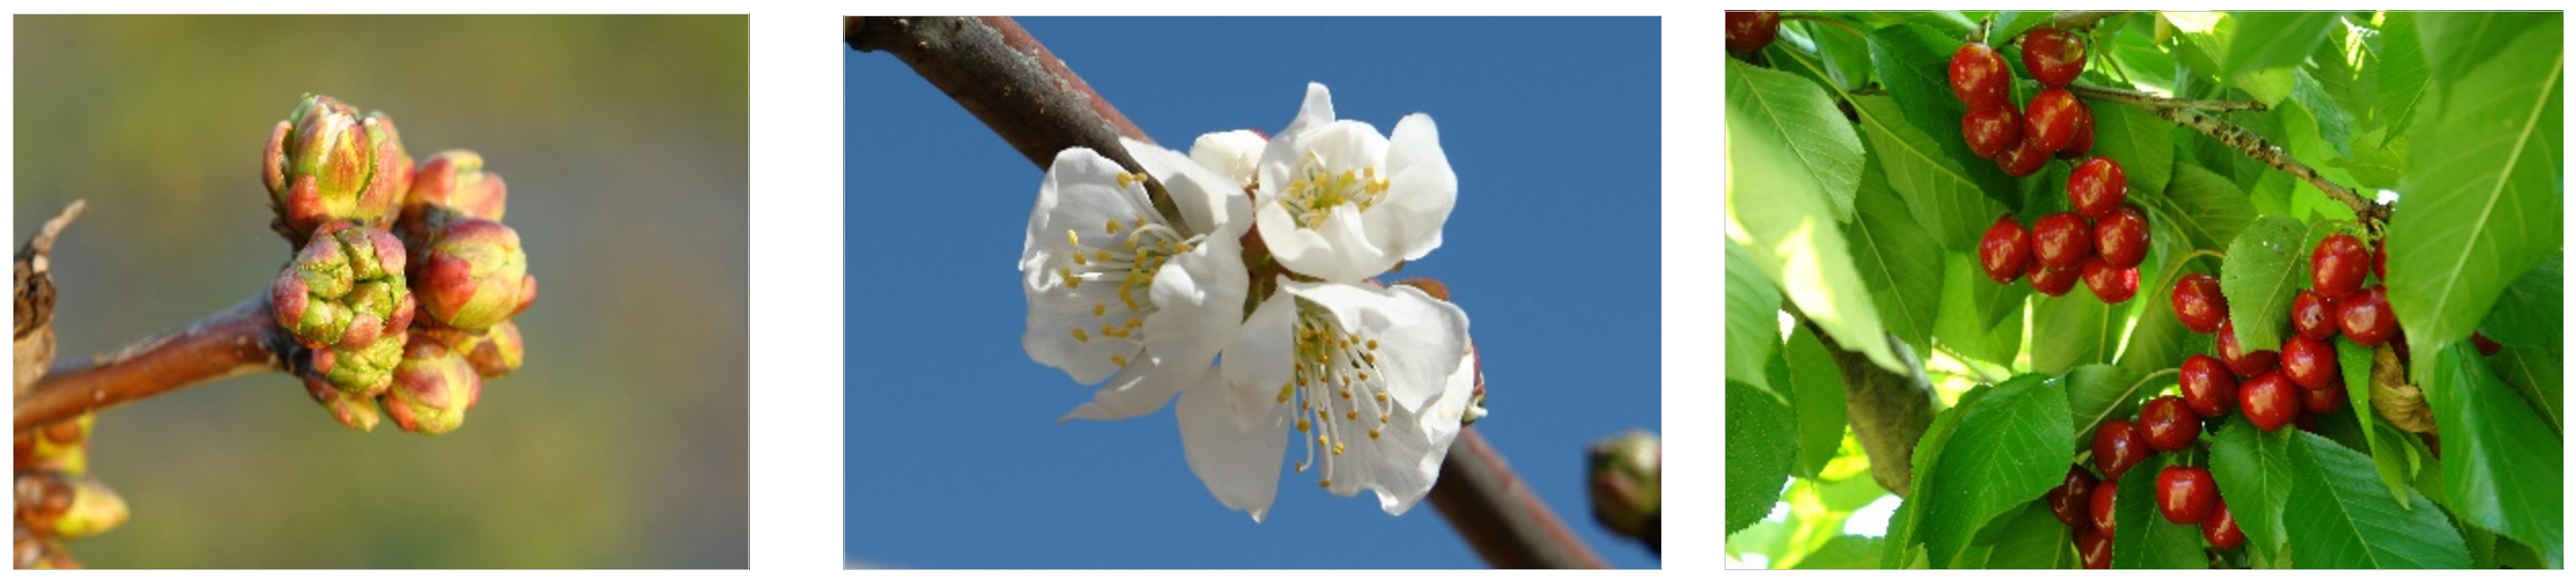 Phenological stages of cherry